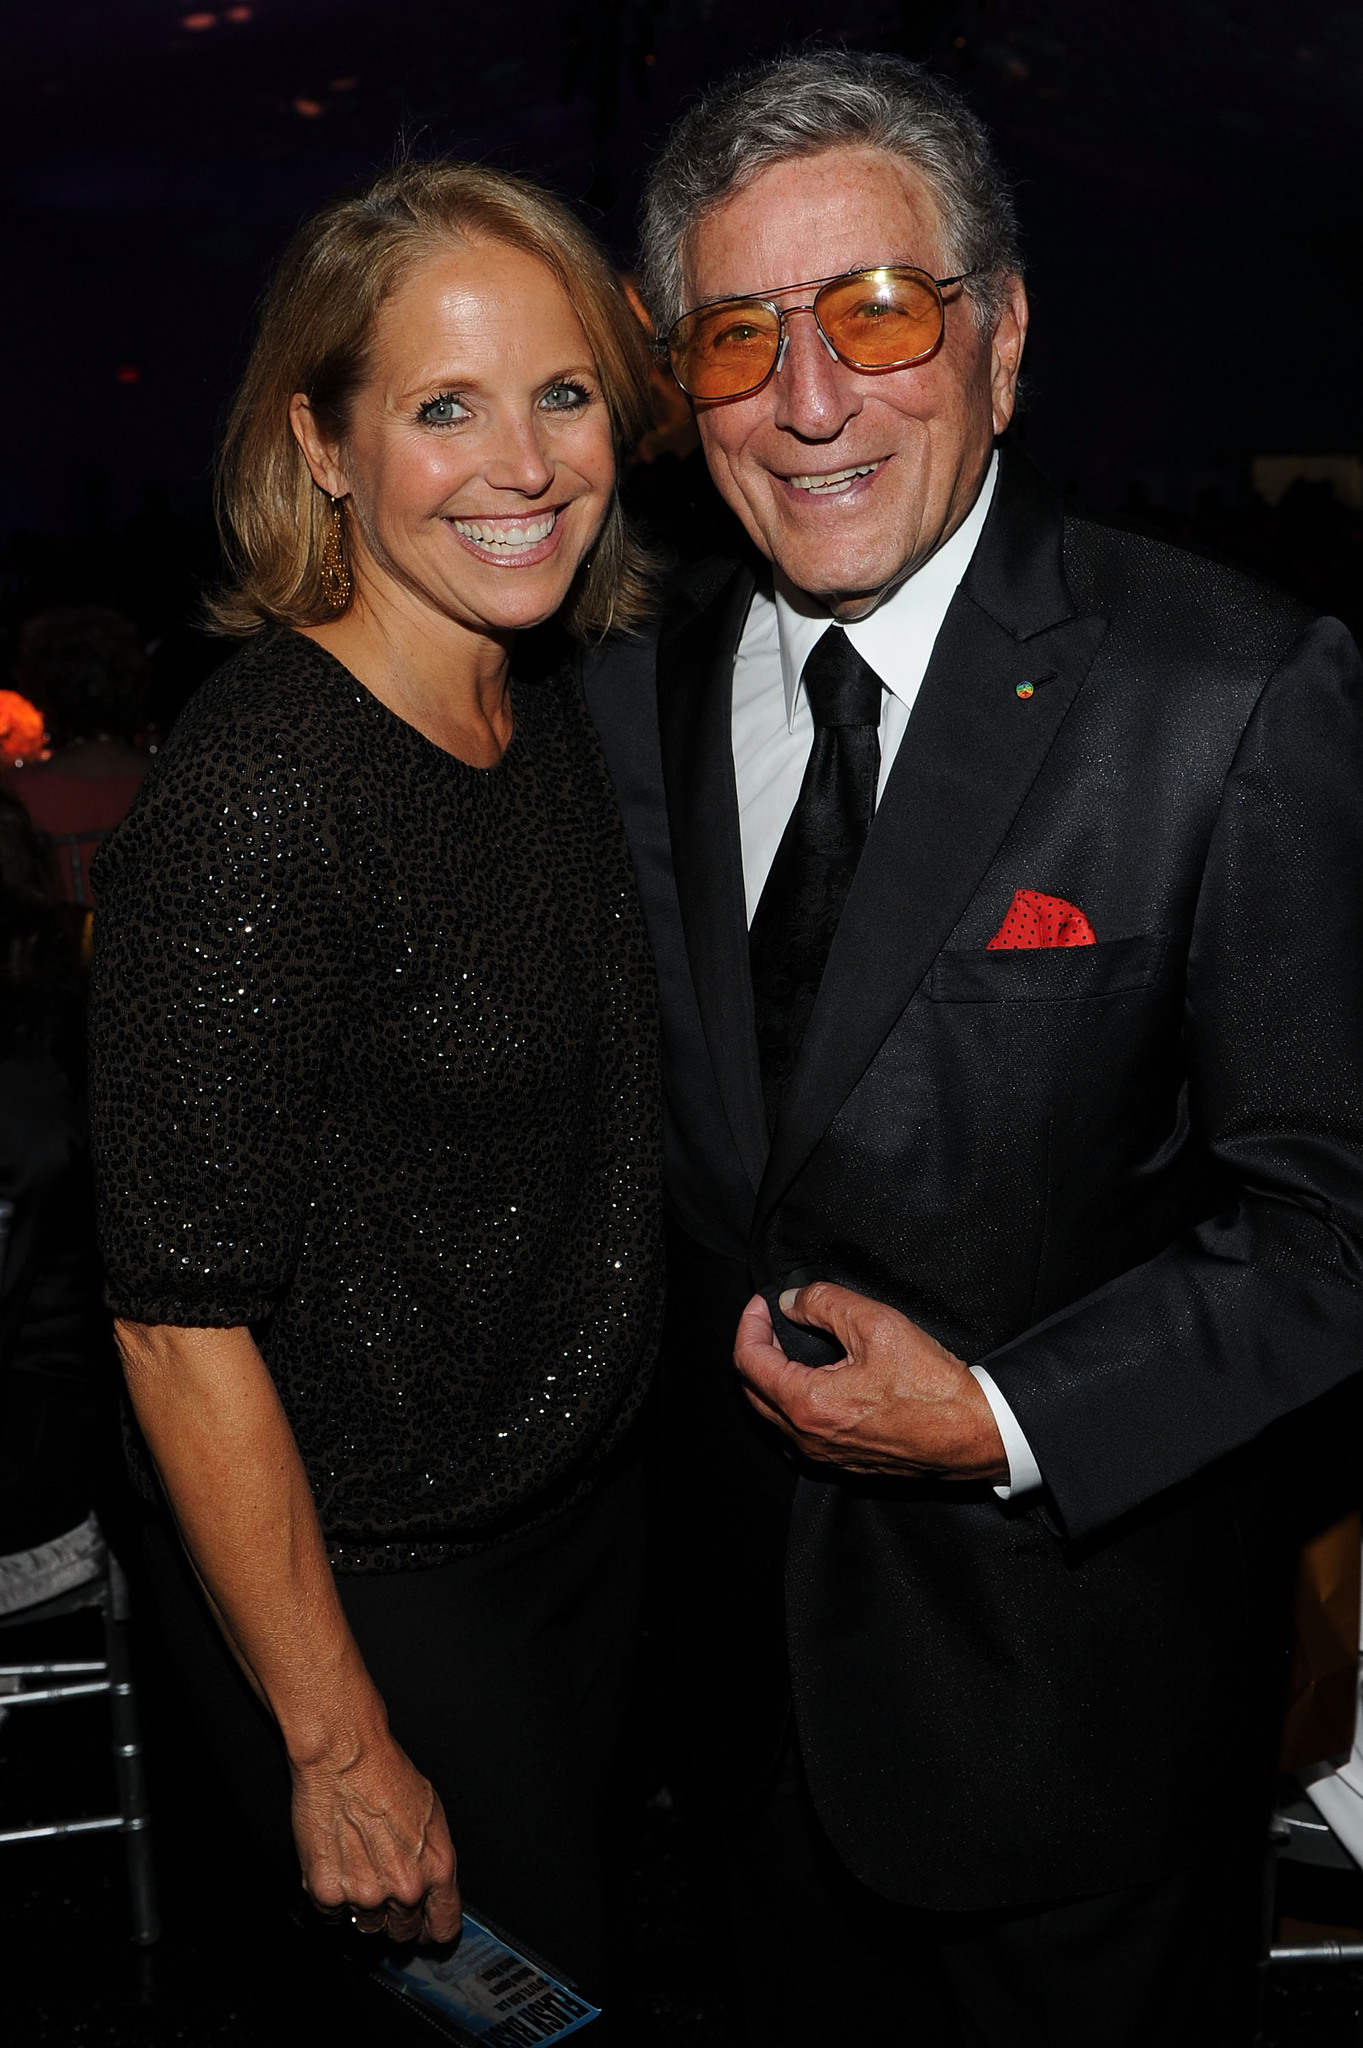 Tony Bennett and Katie Couric